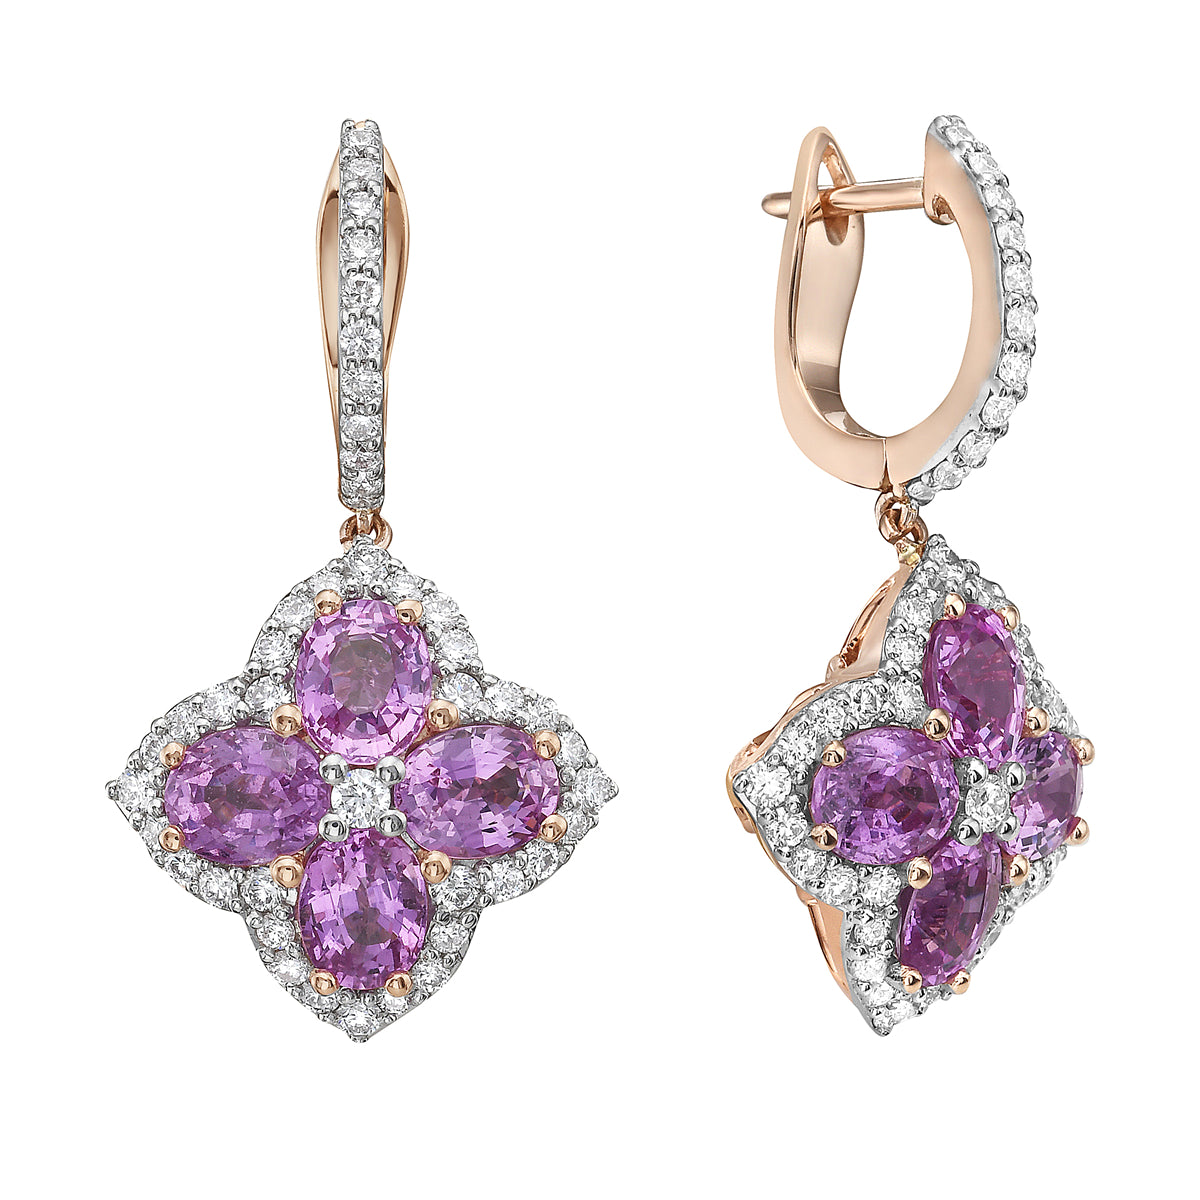 14K White Gold Diamond Clover and Pink Sapphire Earrings